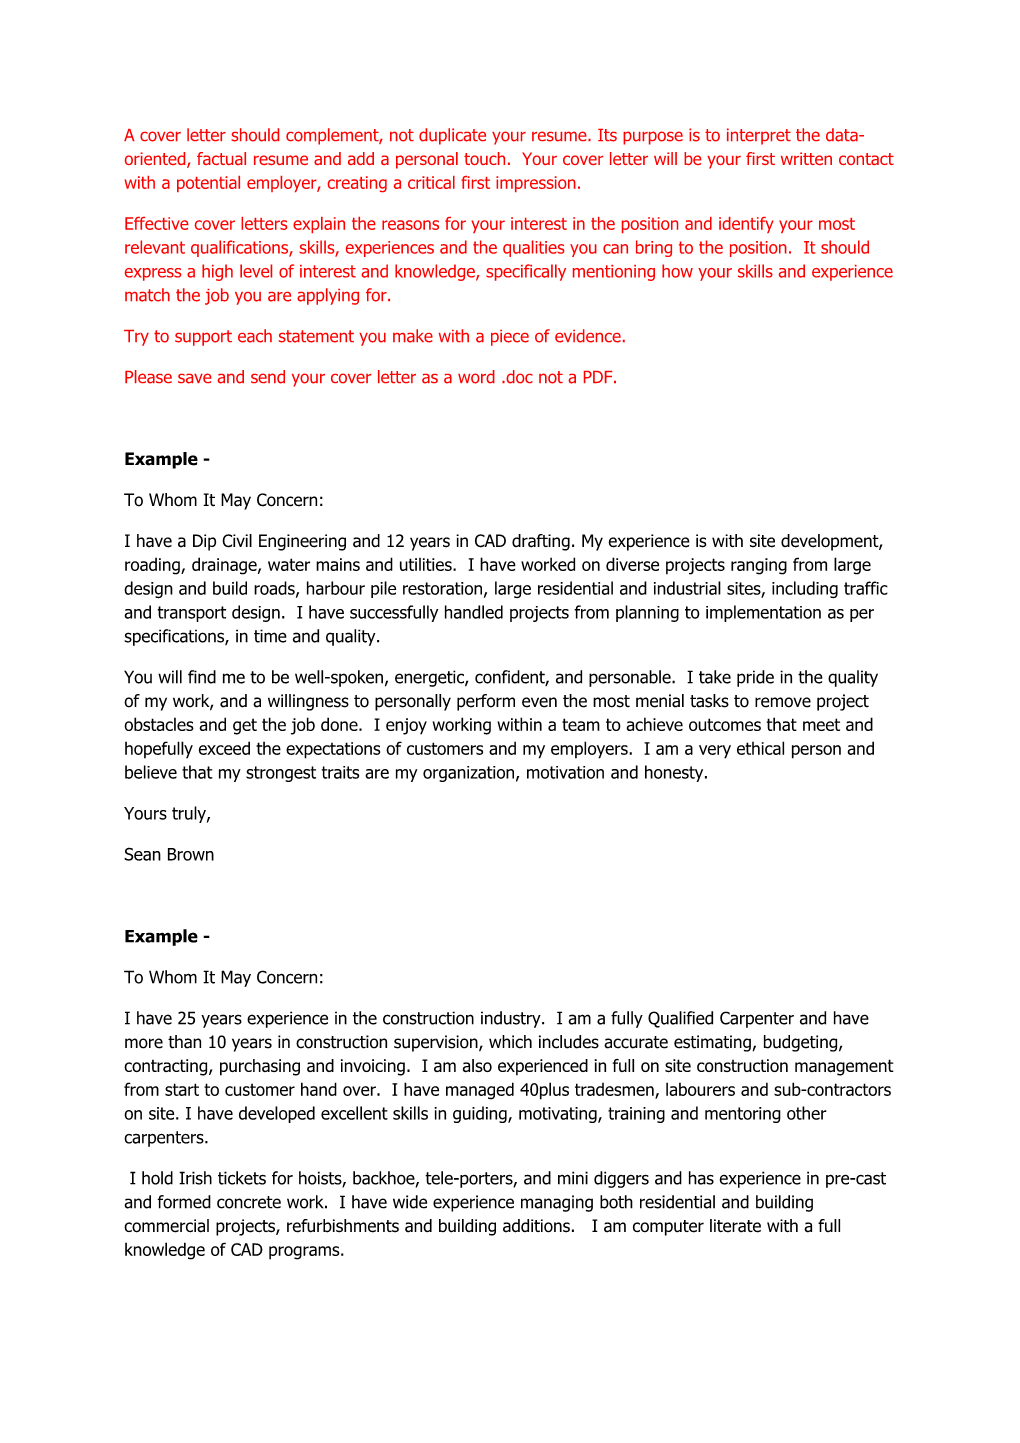 This Cover Letter Will Accompany Your Resume When We Send It out to Your Potential Employer